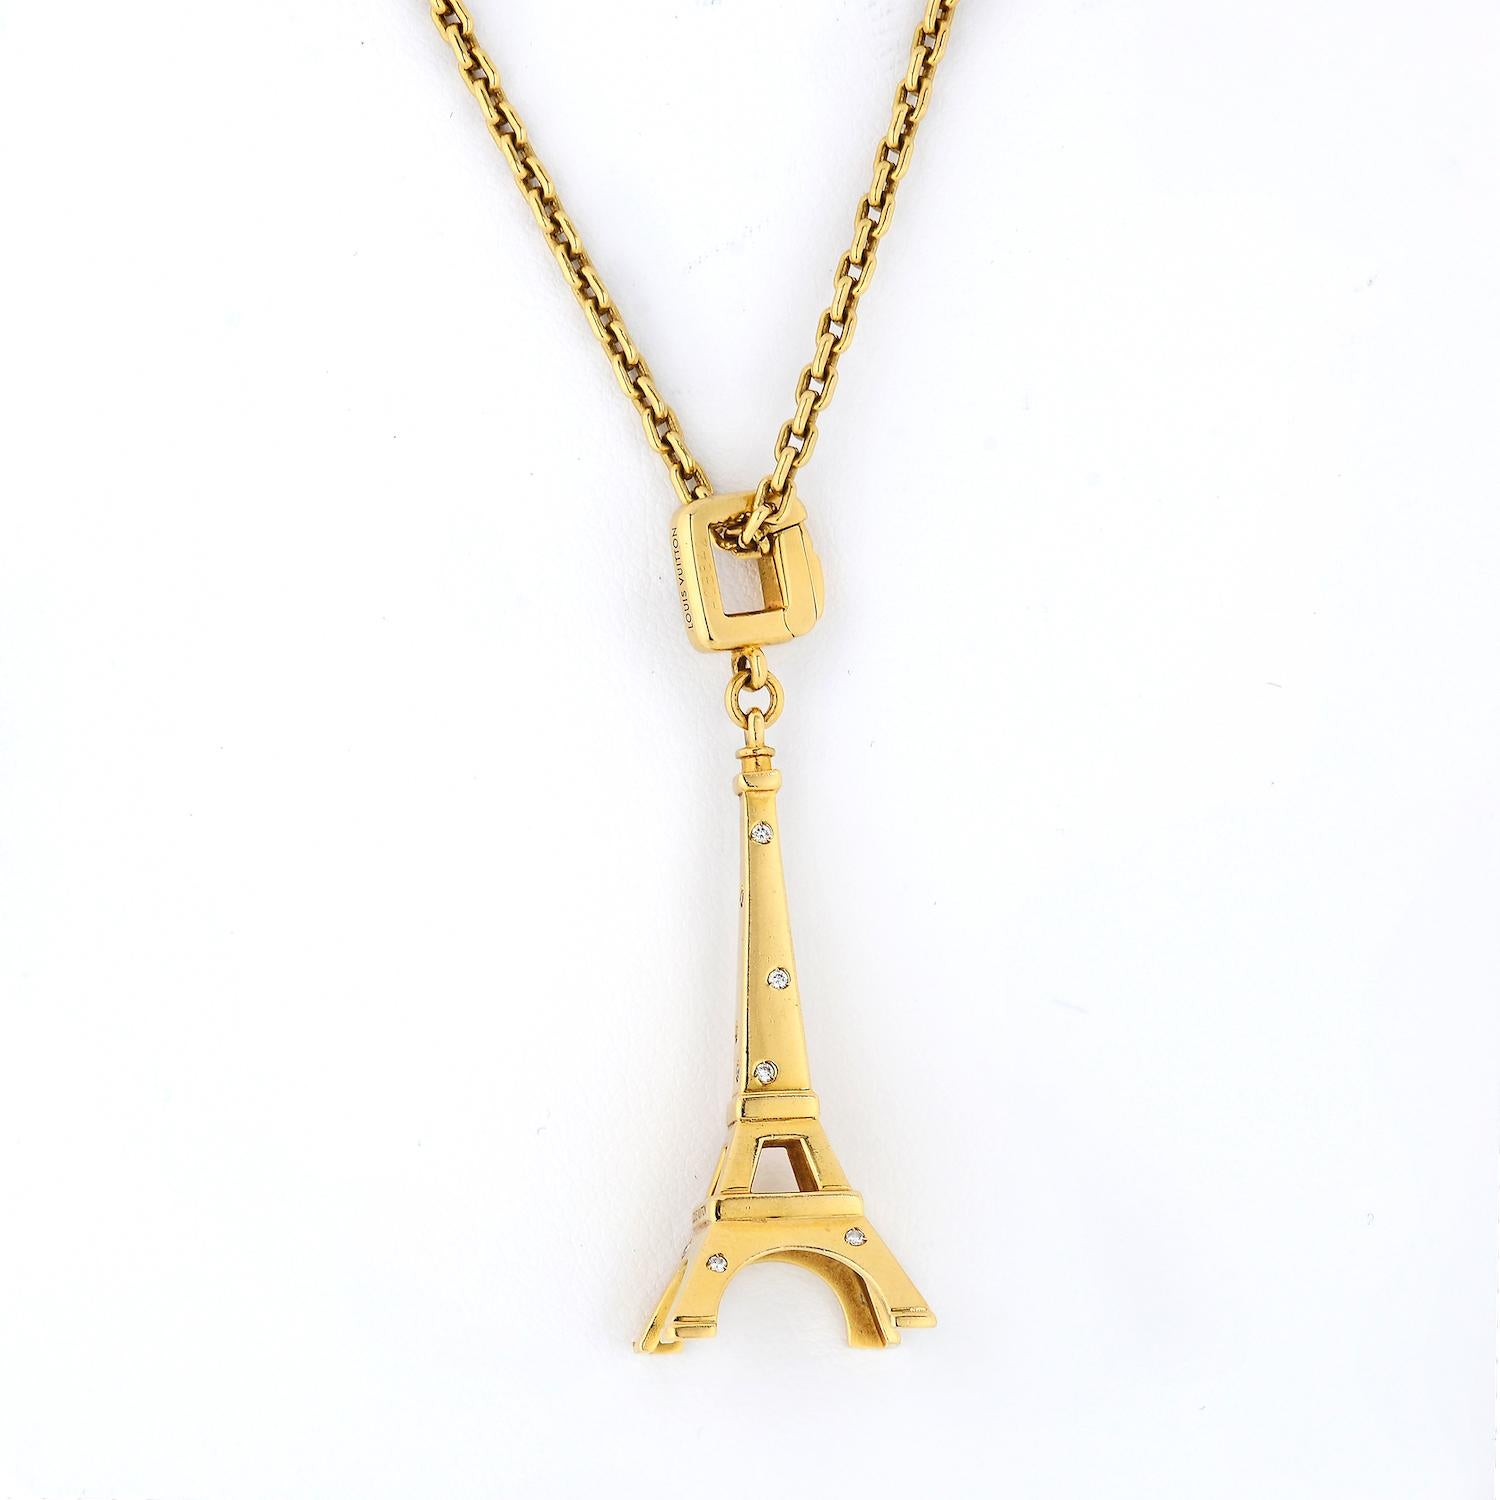 Elite and authentic from Louis Vuitton, this gorgeous charm or pendant on an original chain is crafted from 18k yellow gold with a high polished finish featuring the popular and iconic Eiffel Tower in Paris. Scattered along the tower are flush set